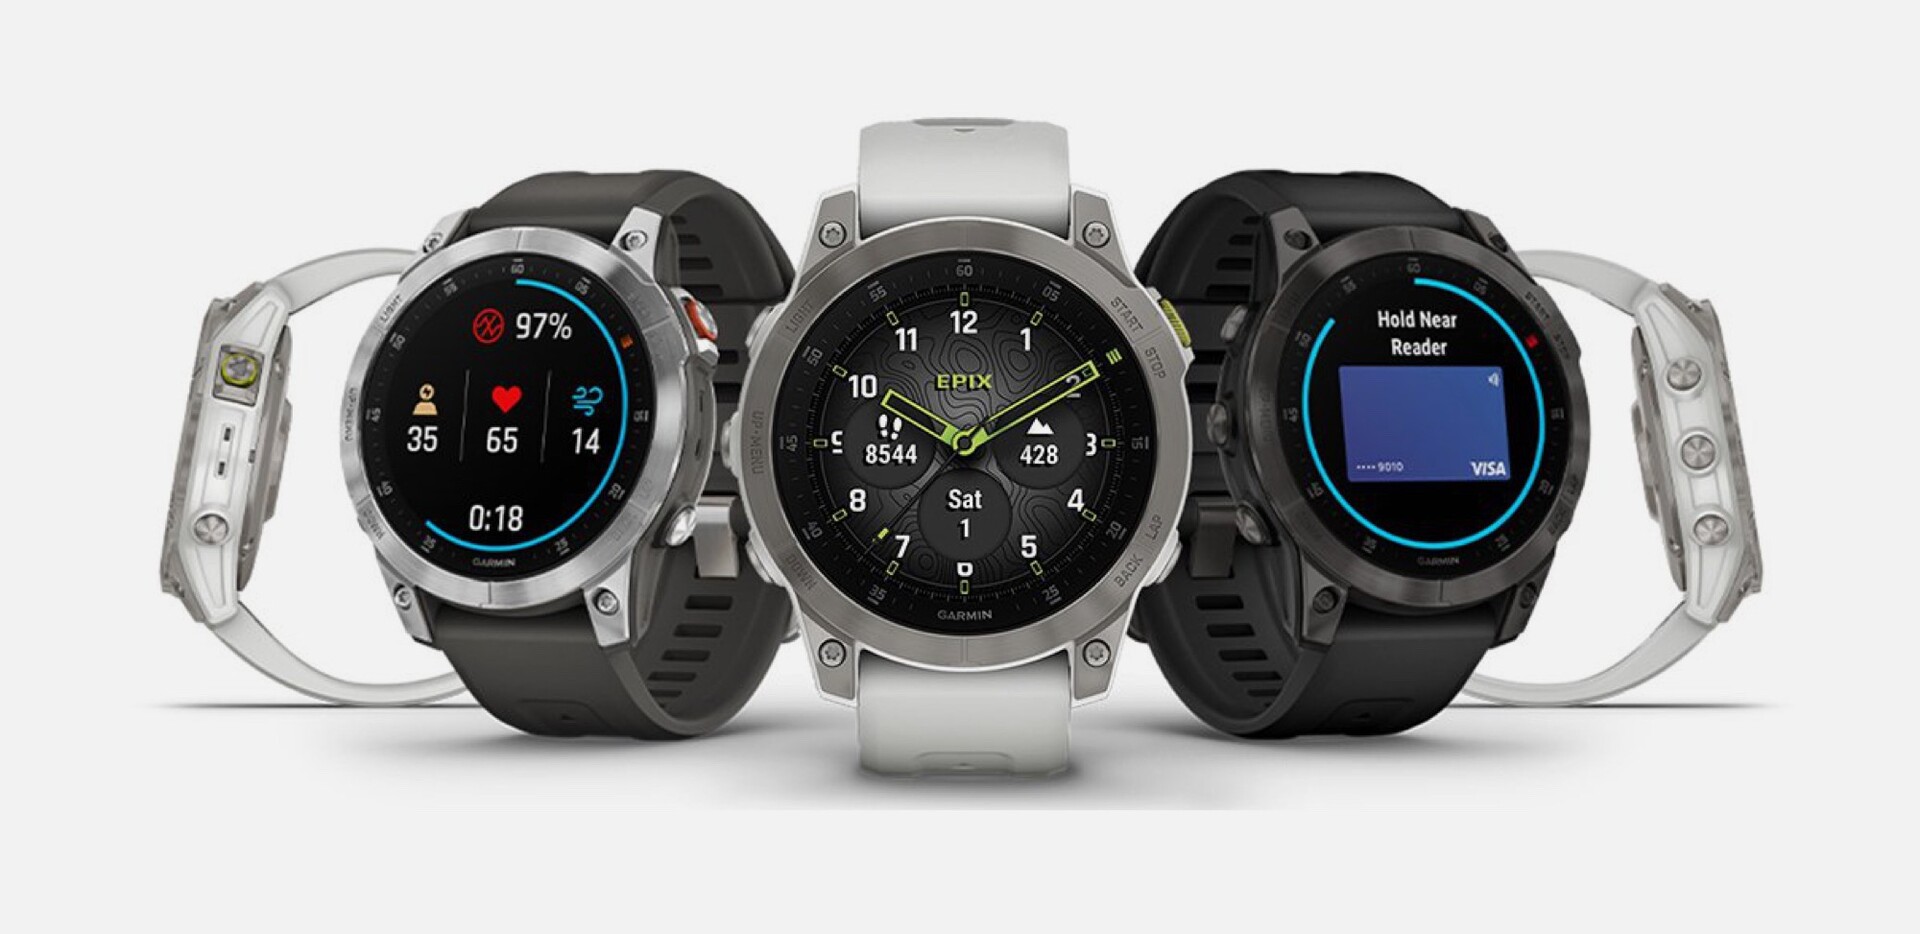 Garmin Epix smartwatch unveiled with an display and up to 32 GB of storage - NotebookCheck.net